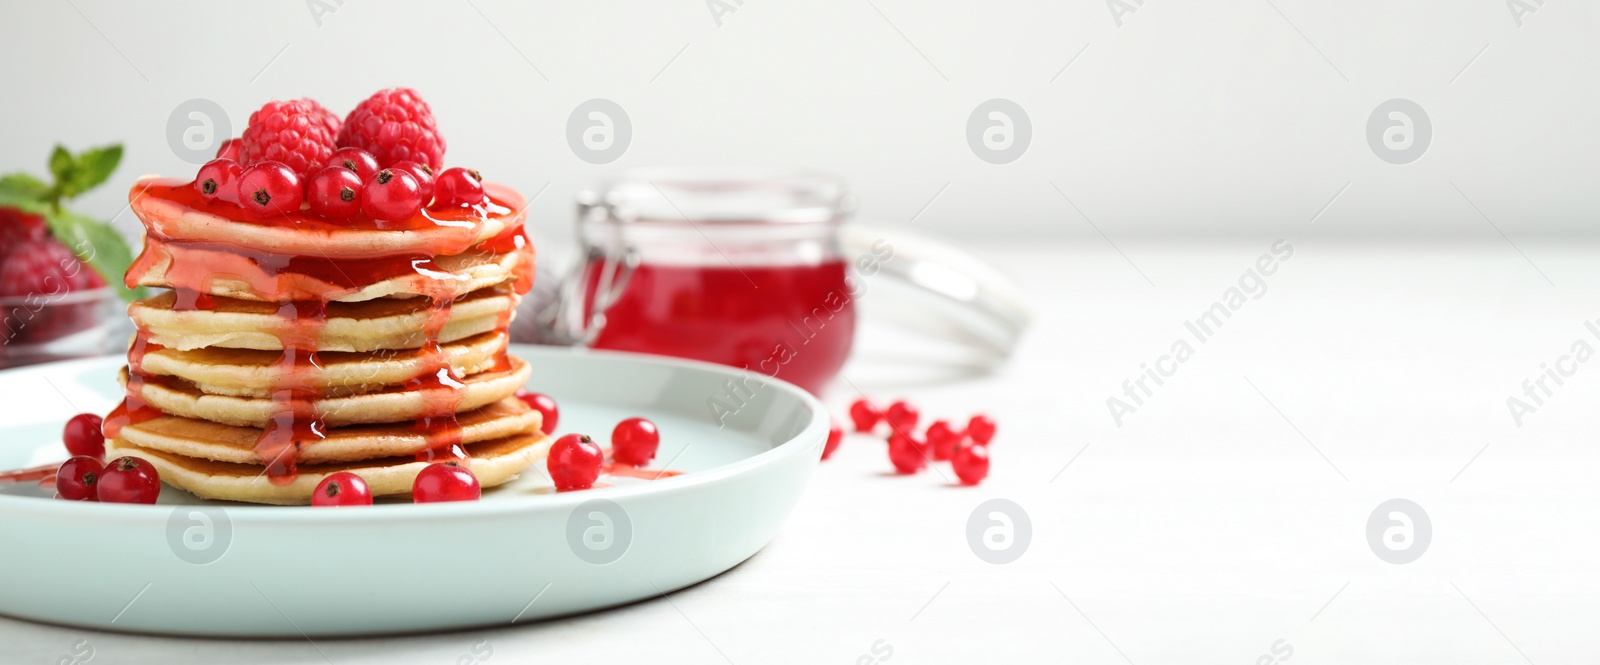 Image of Delicious pancakes with fresh berries and syrup on white table, space for text. Banner design